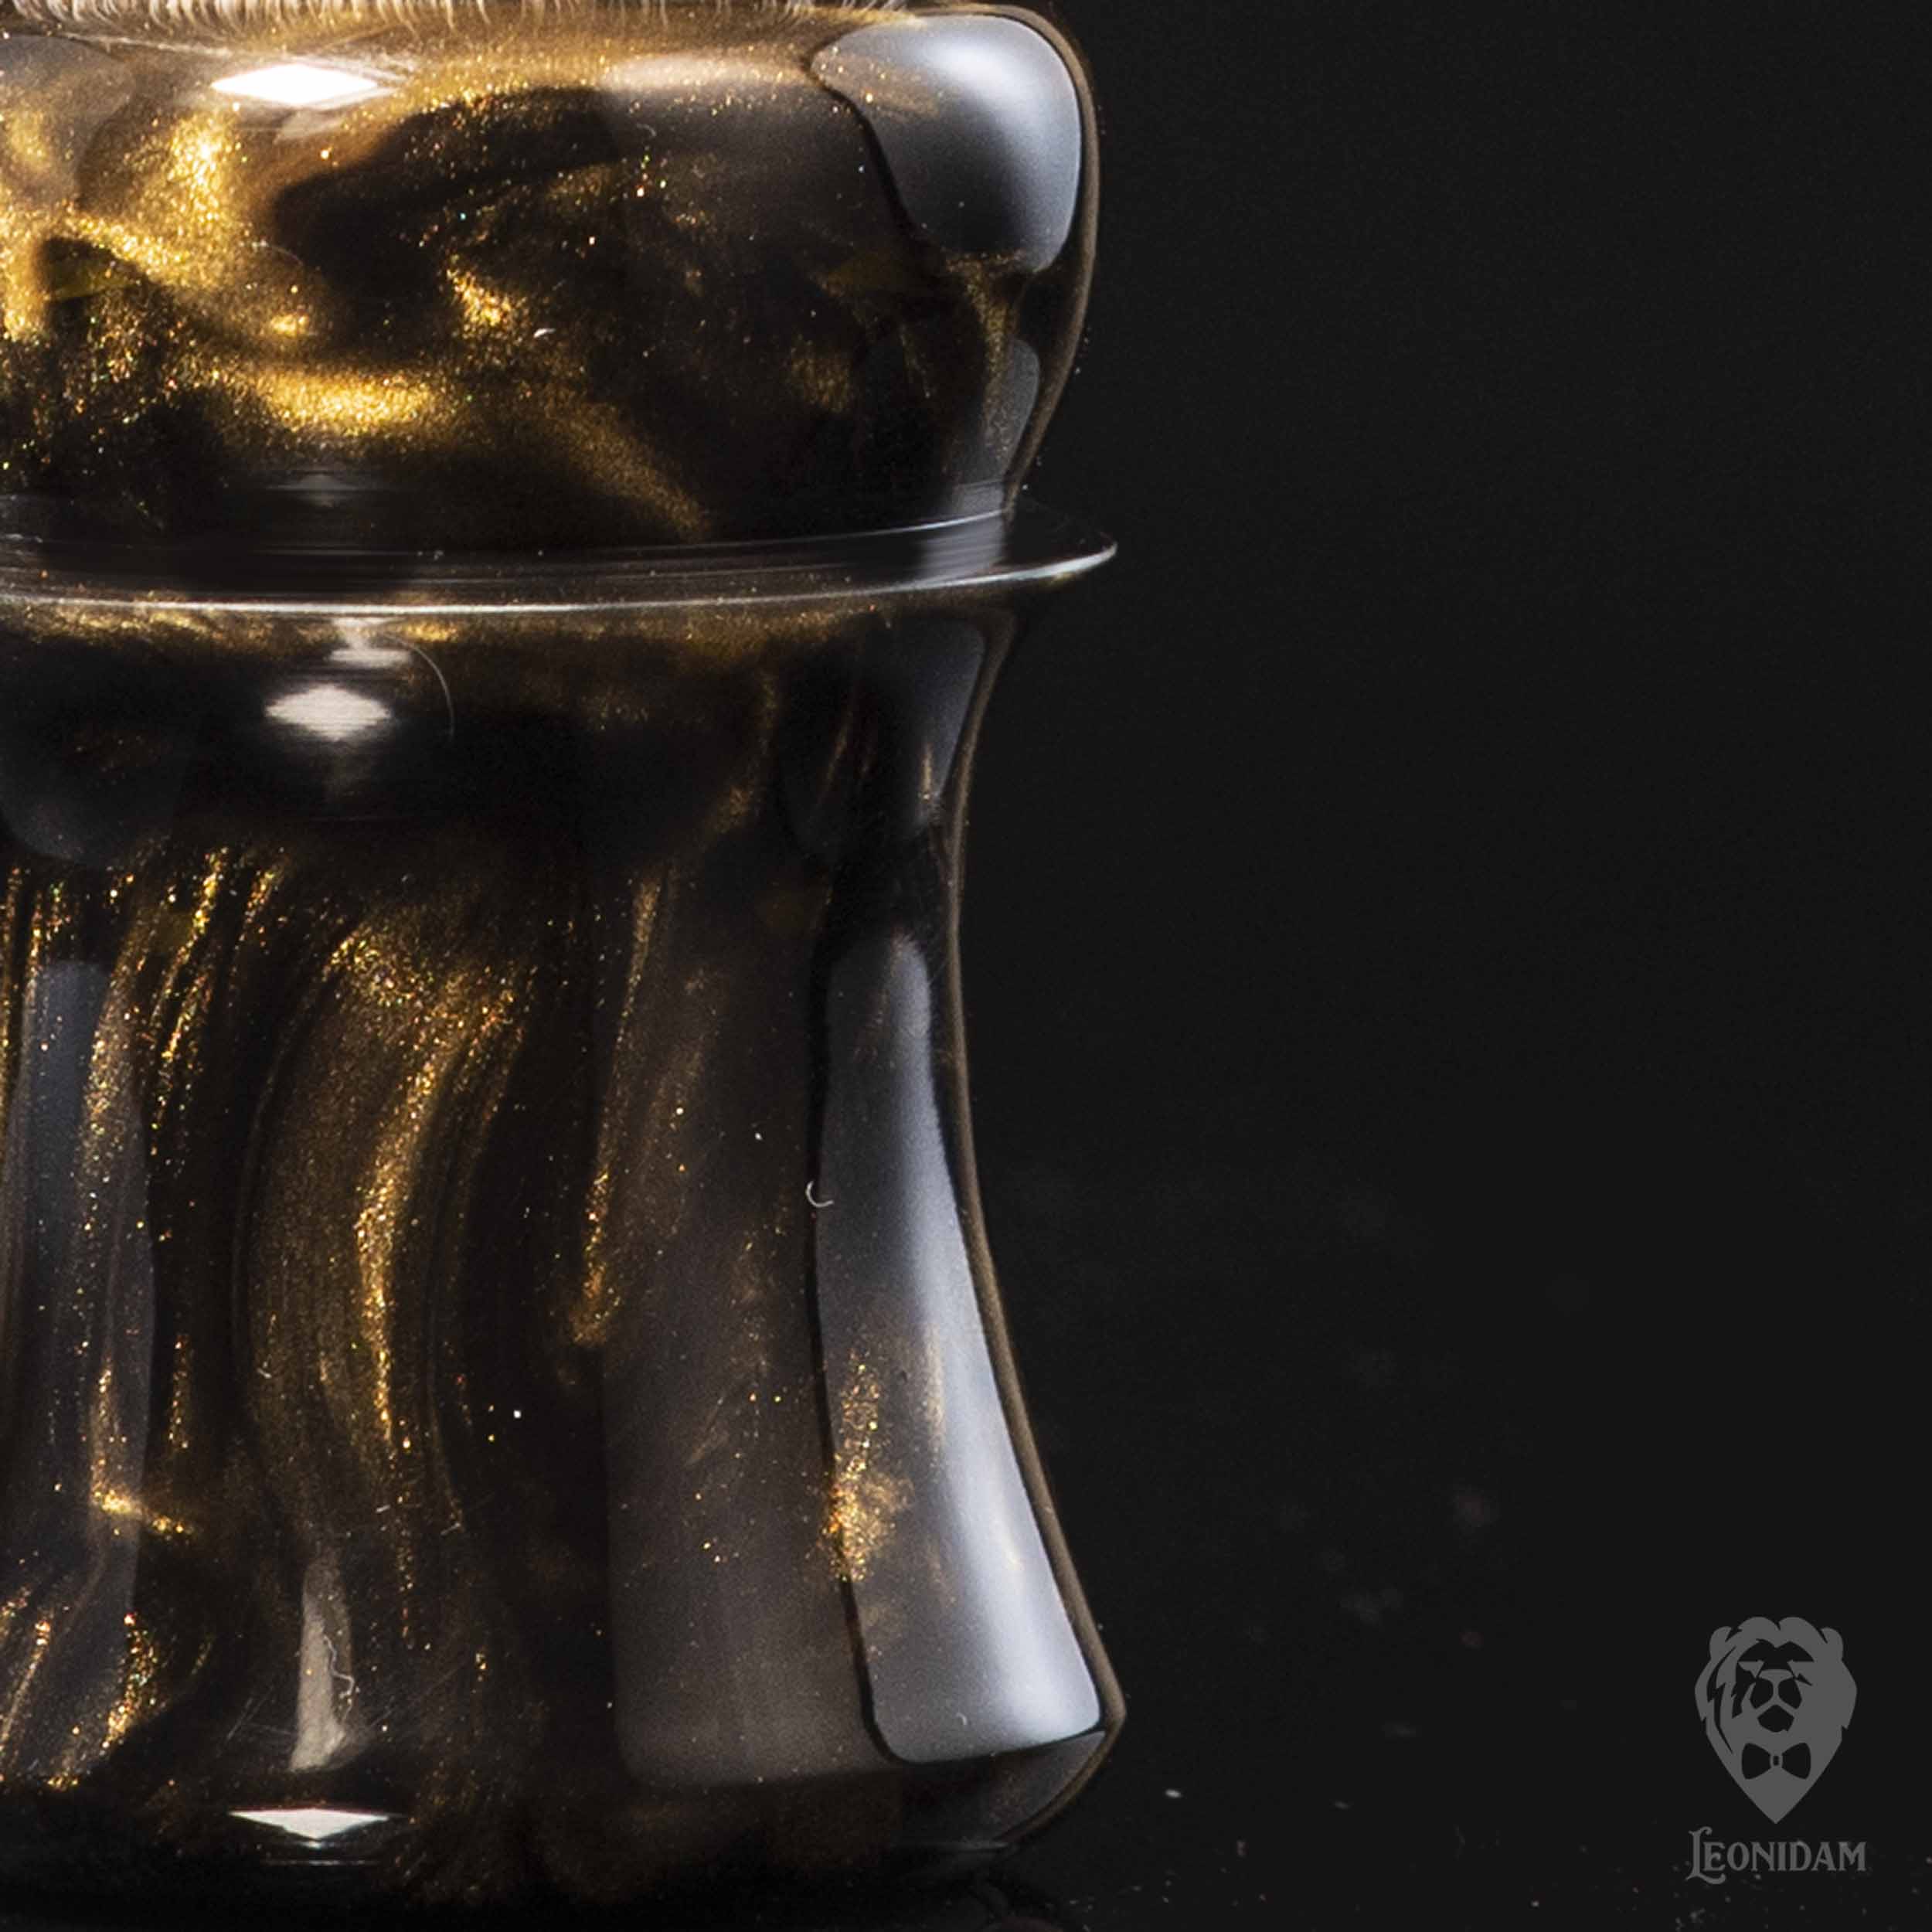 Closeup of Handmade Shaving Brush "Oblivion" in polished black and gold resin